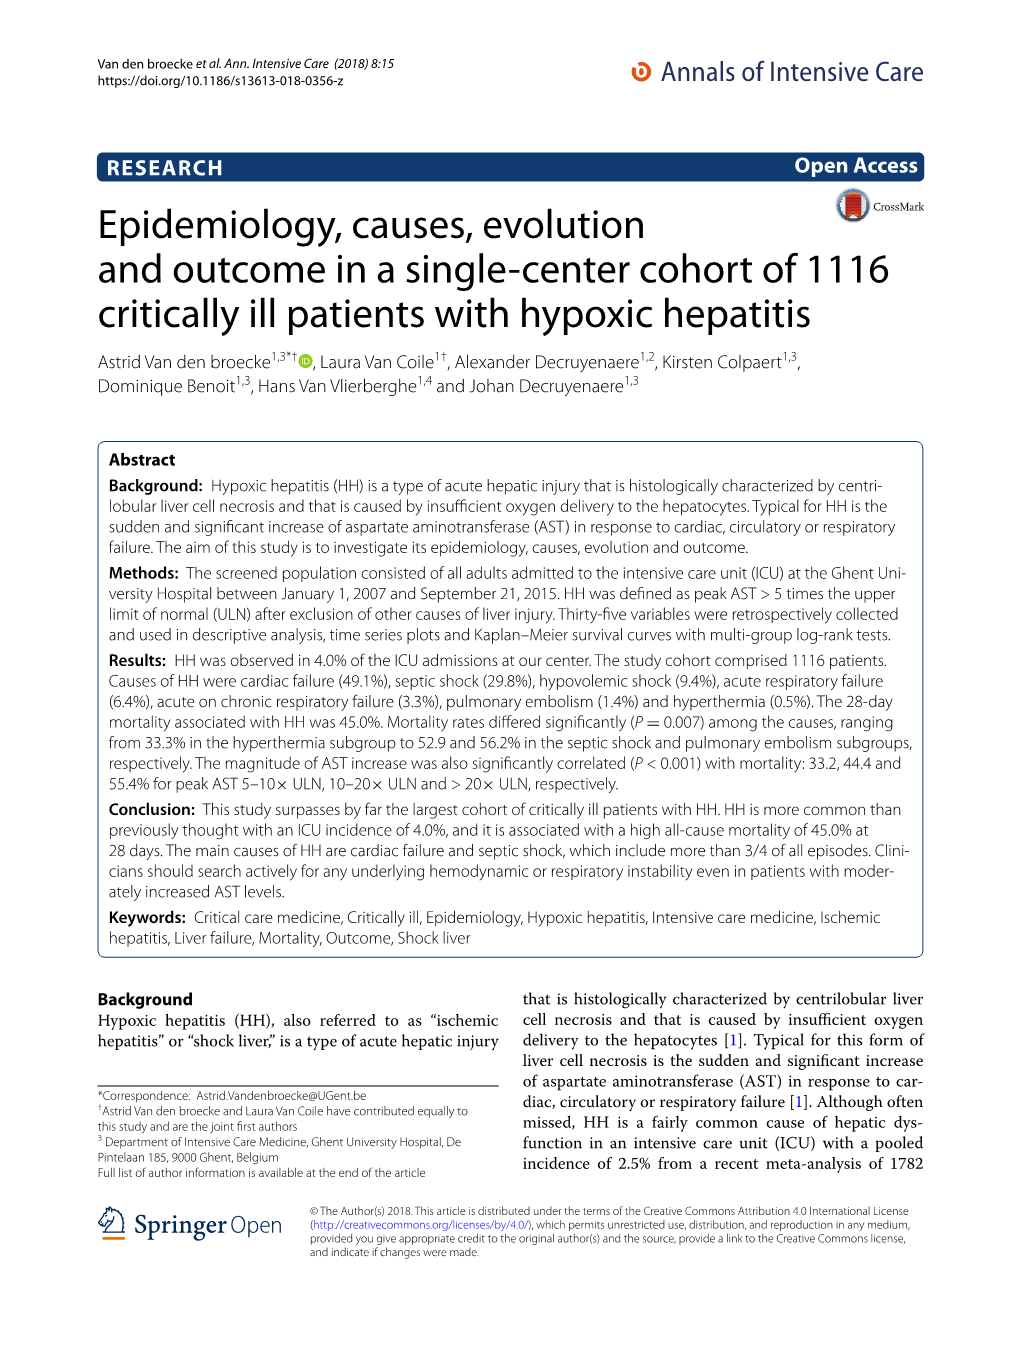 Epidemiology, Causes, Evolution and Outcome in a Single-Center Cohort Of